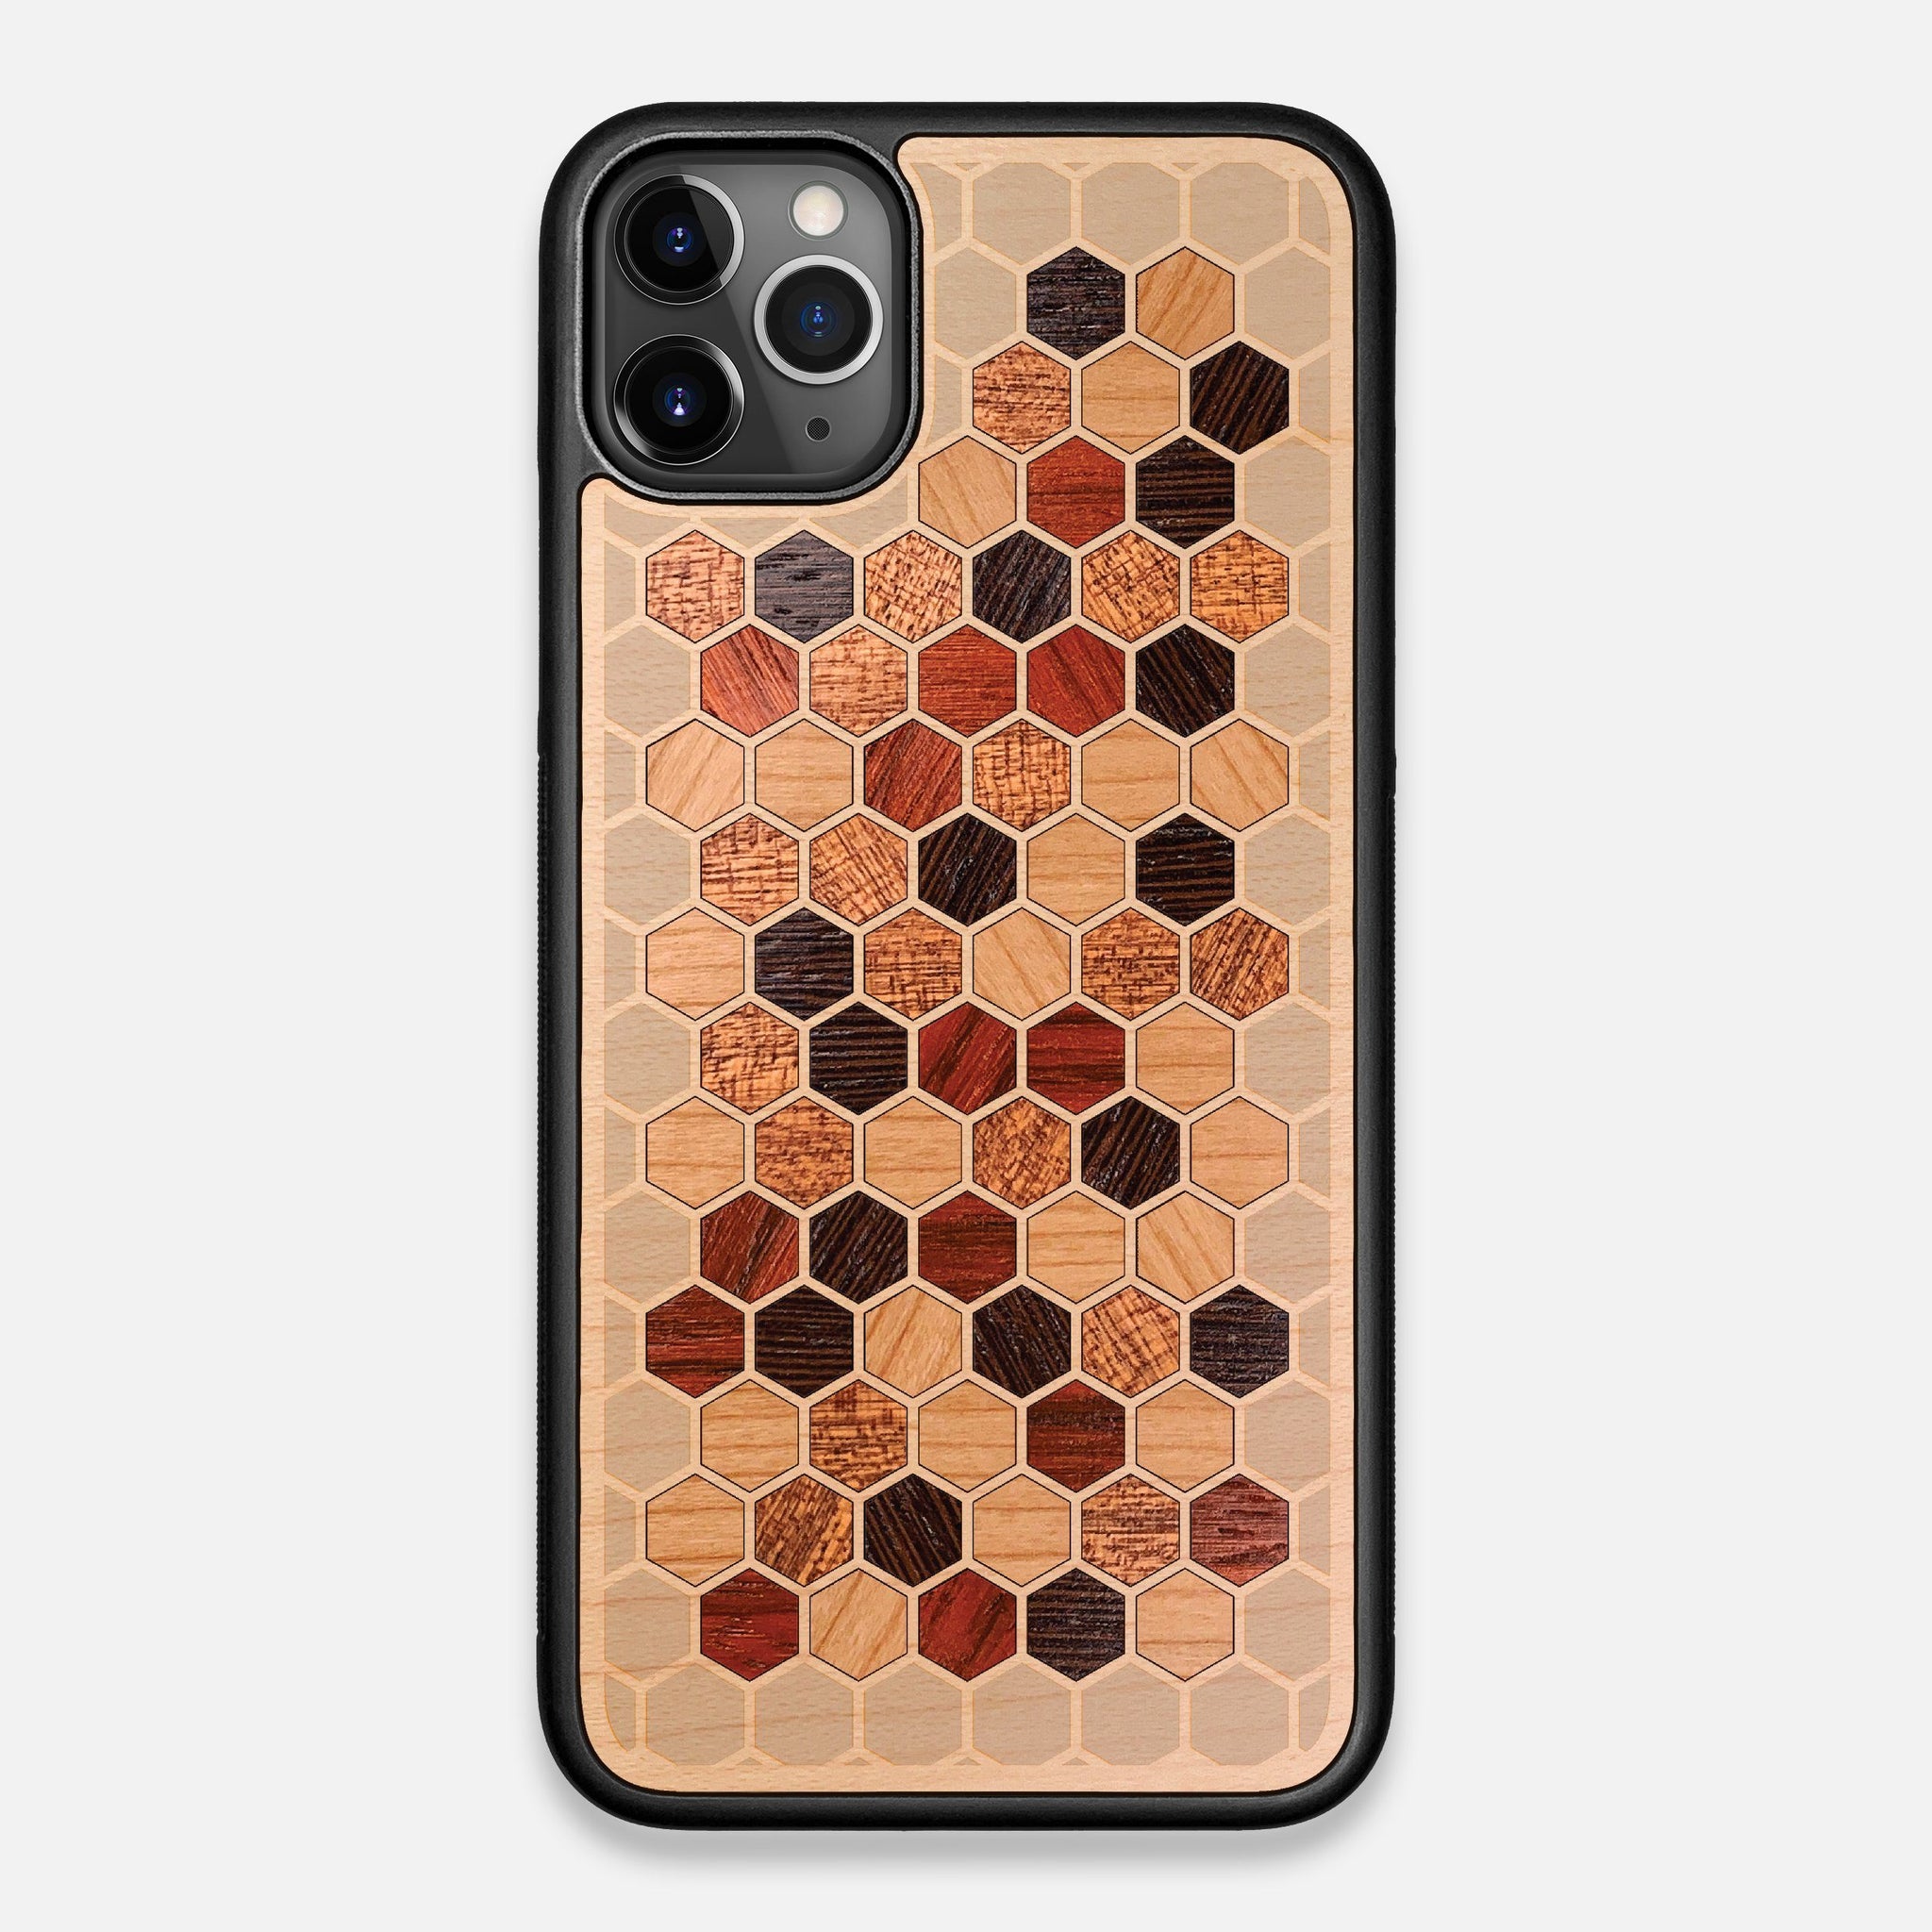 Front view of the Cellular Maple Wood iPhone 11 Pro Max Case by Keyway Designs